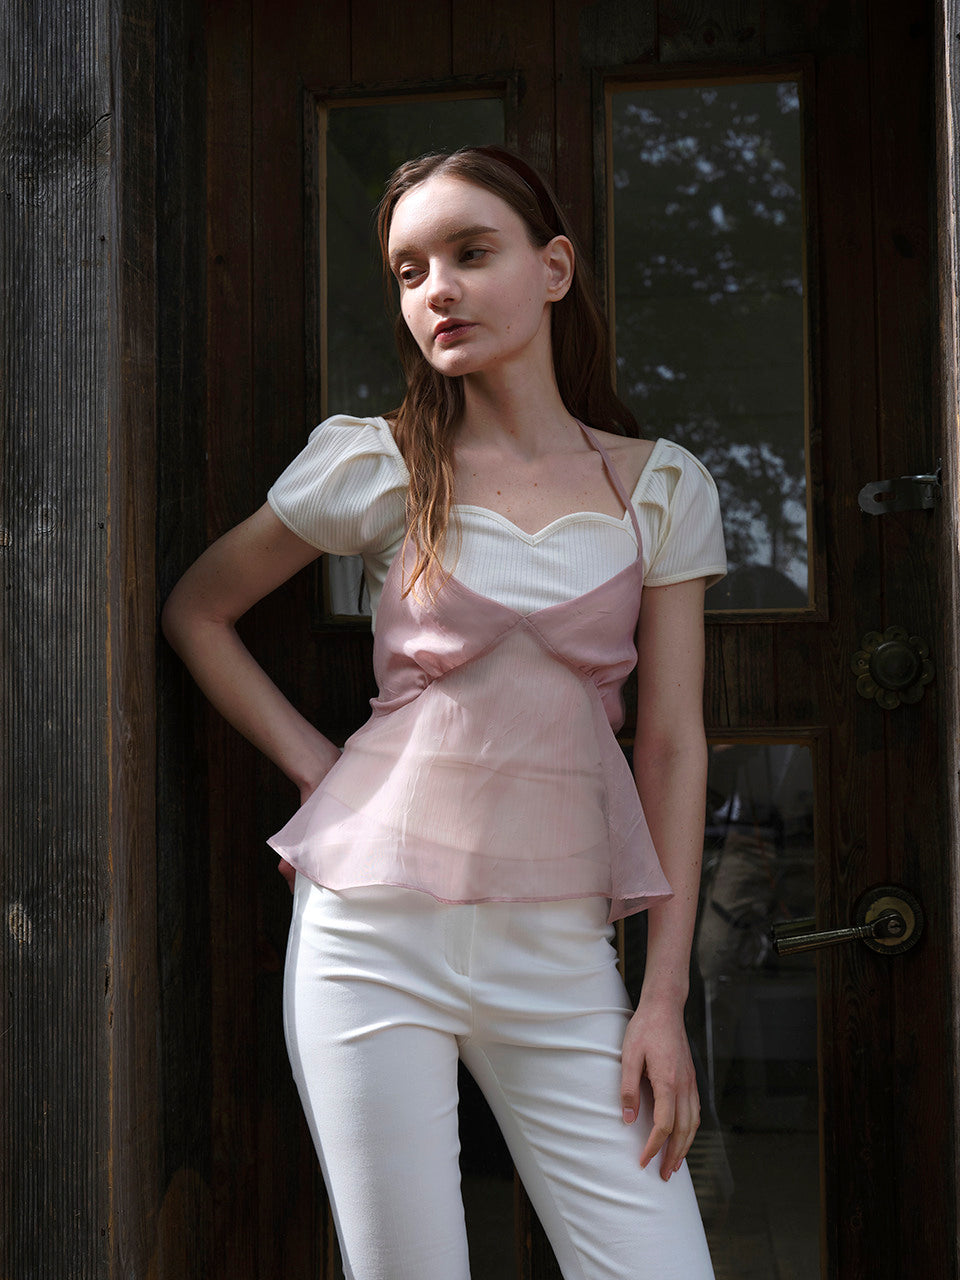 See-Through bustier top (Neutral pink)